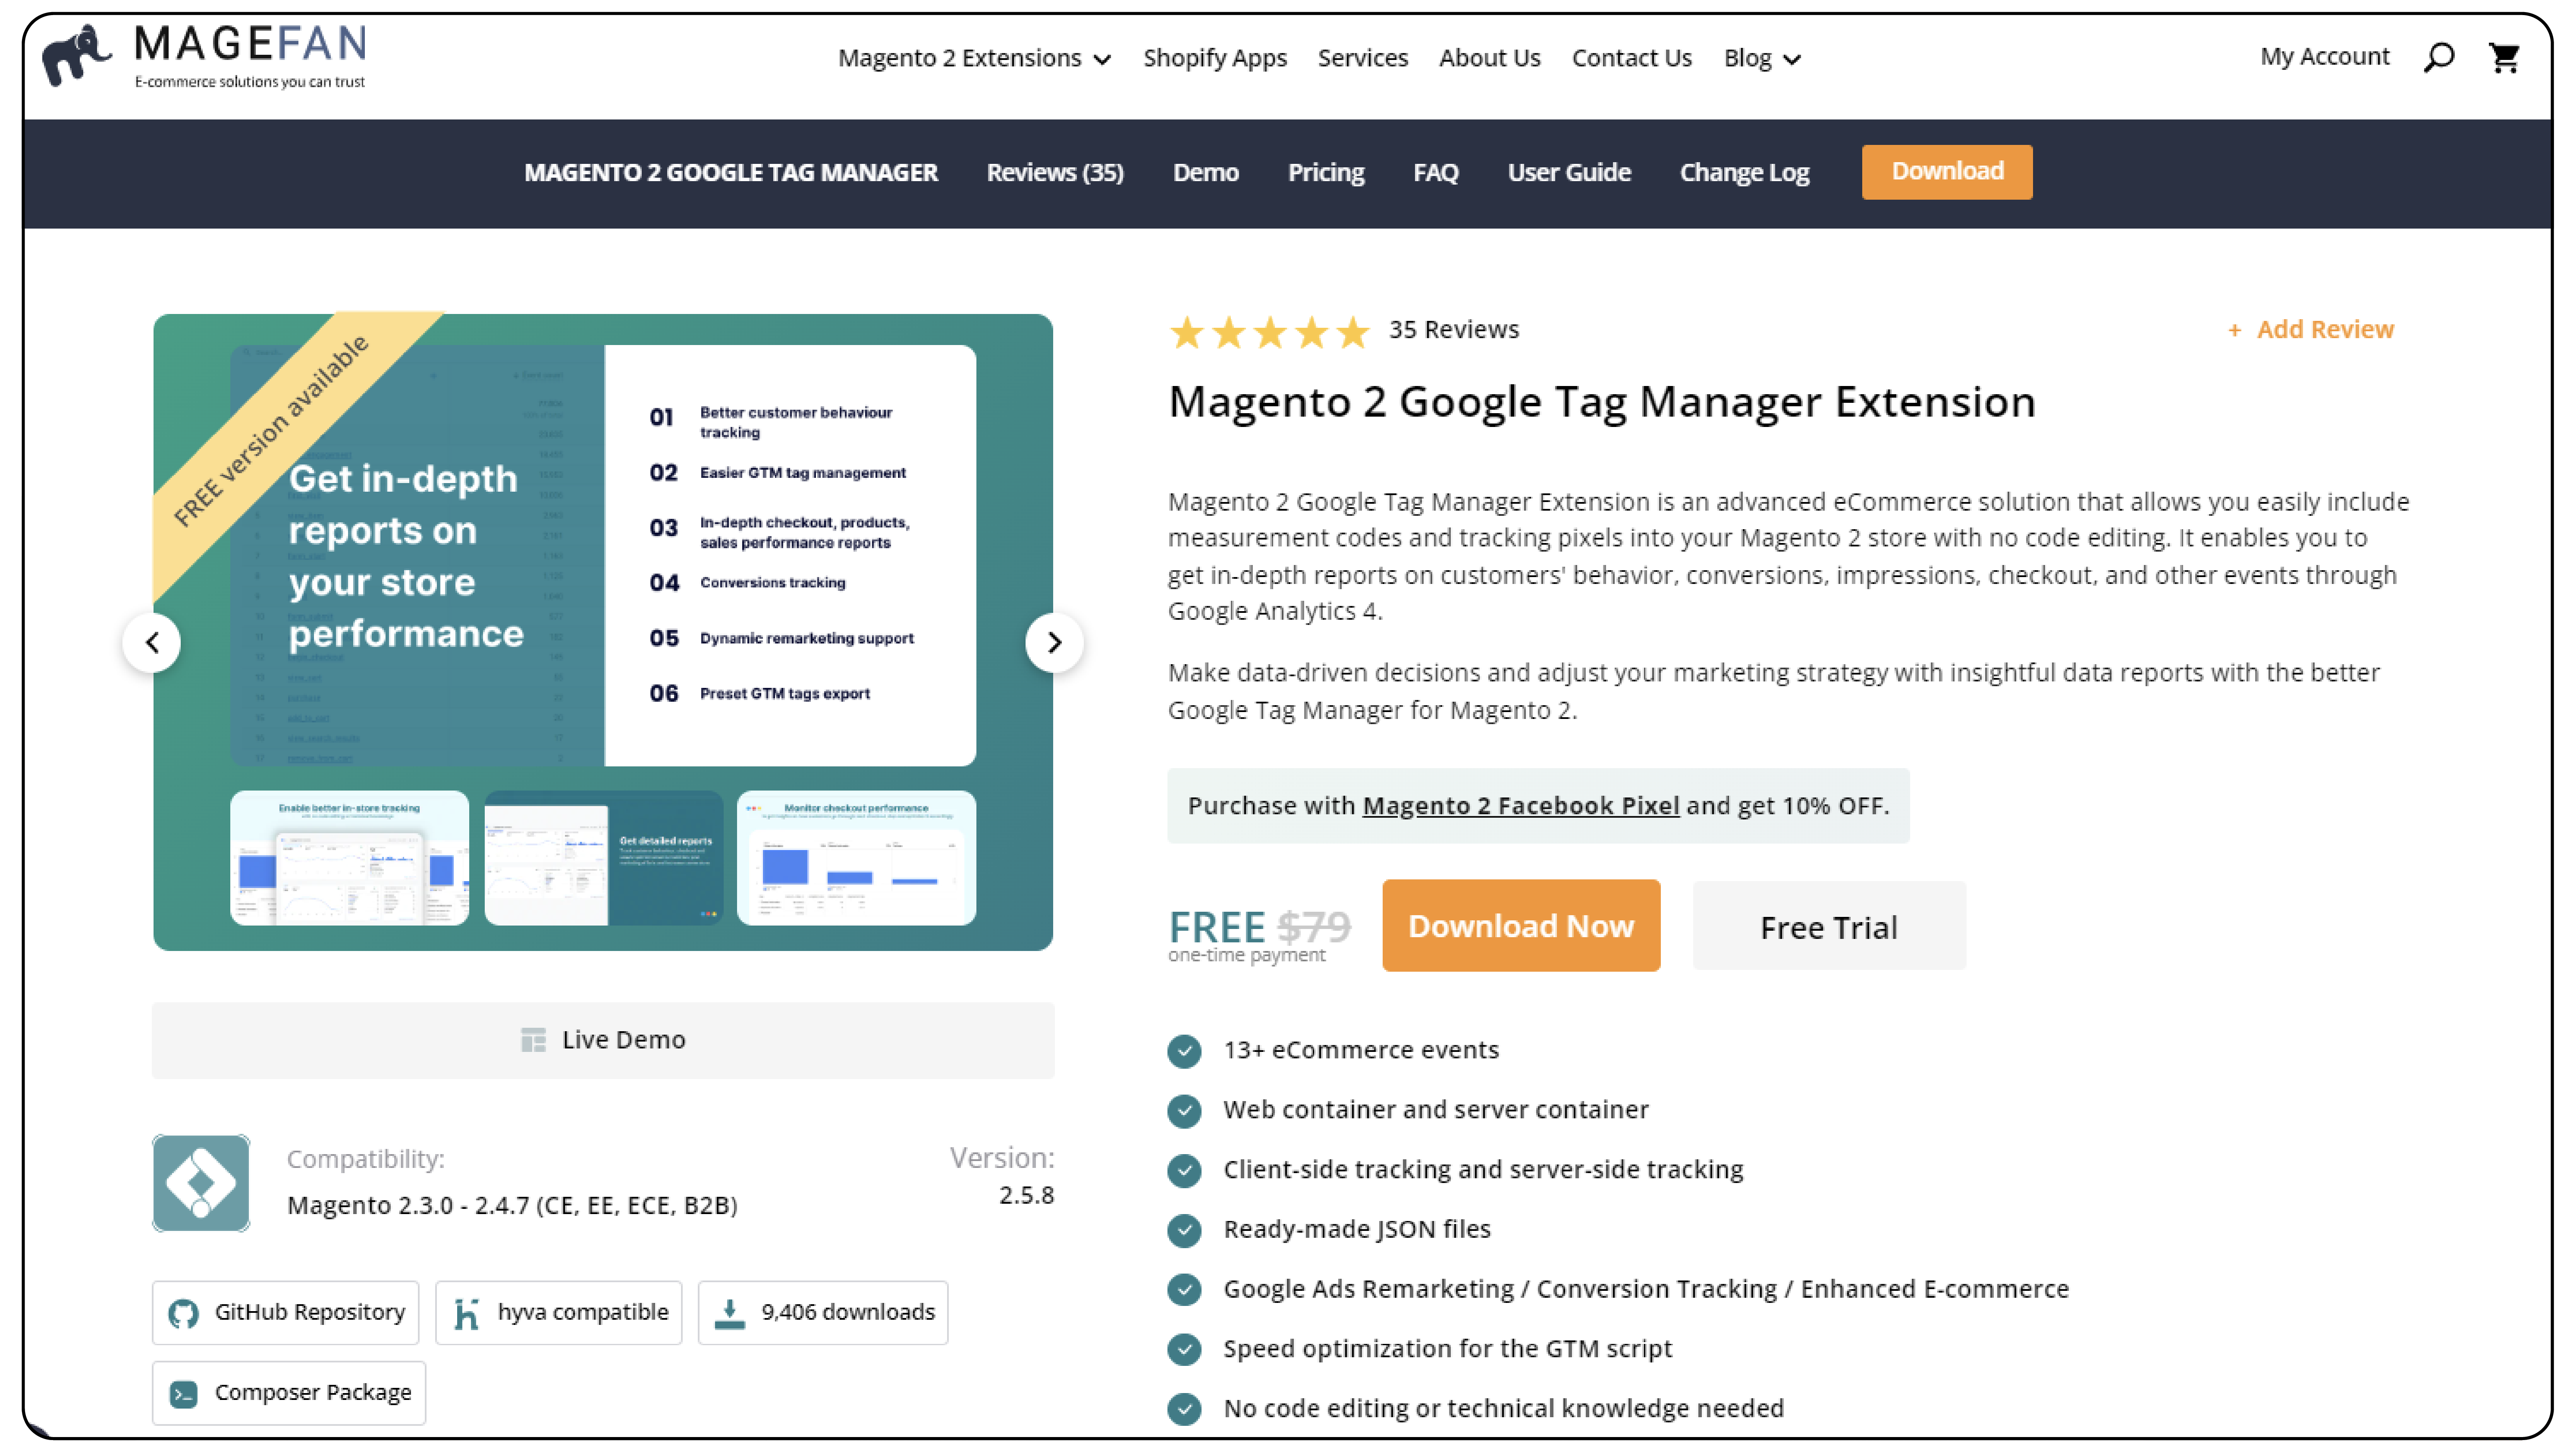 Google Tag Manager by Magefan